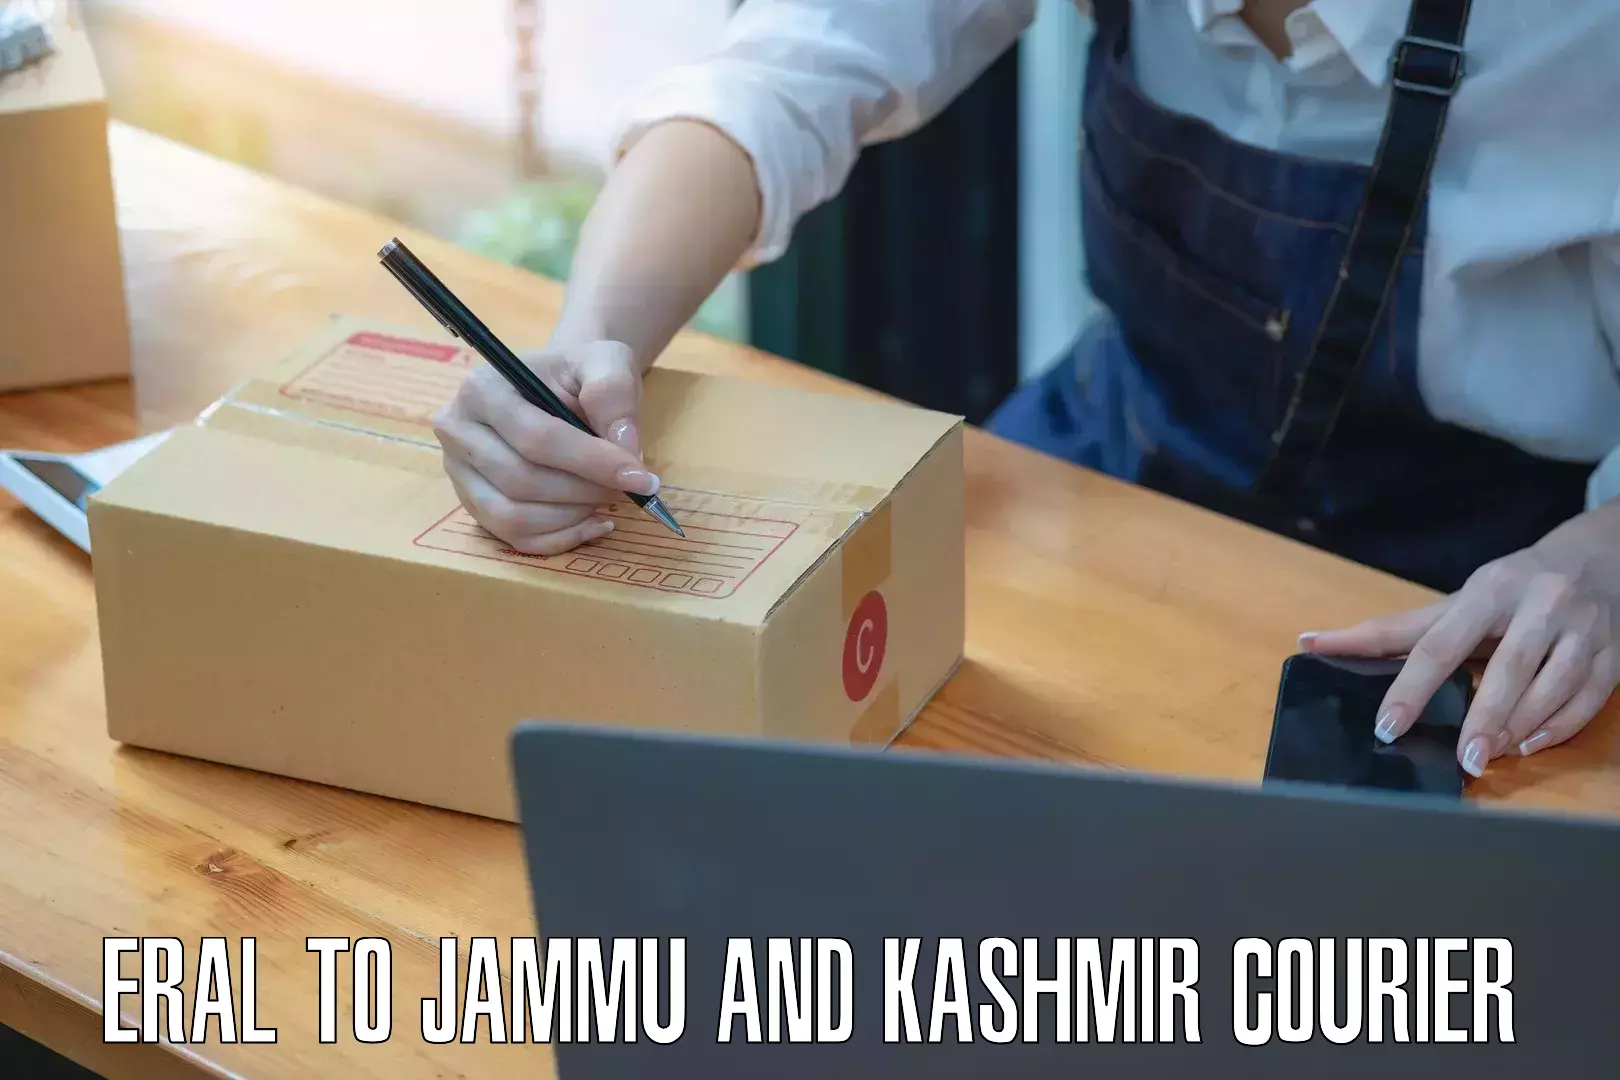 Courier service efficiency in Eral to Jammu and Kashmir